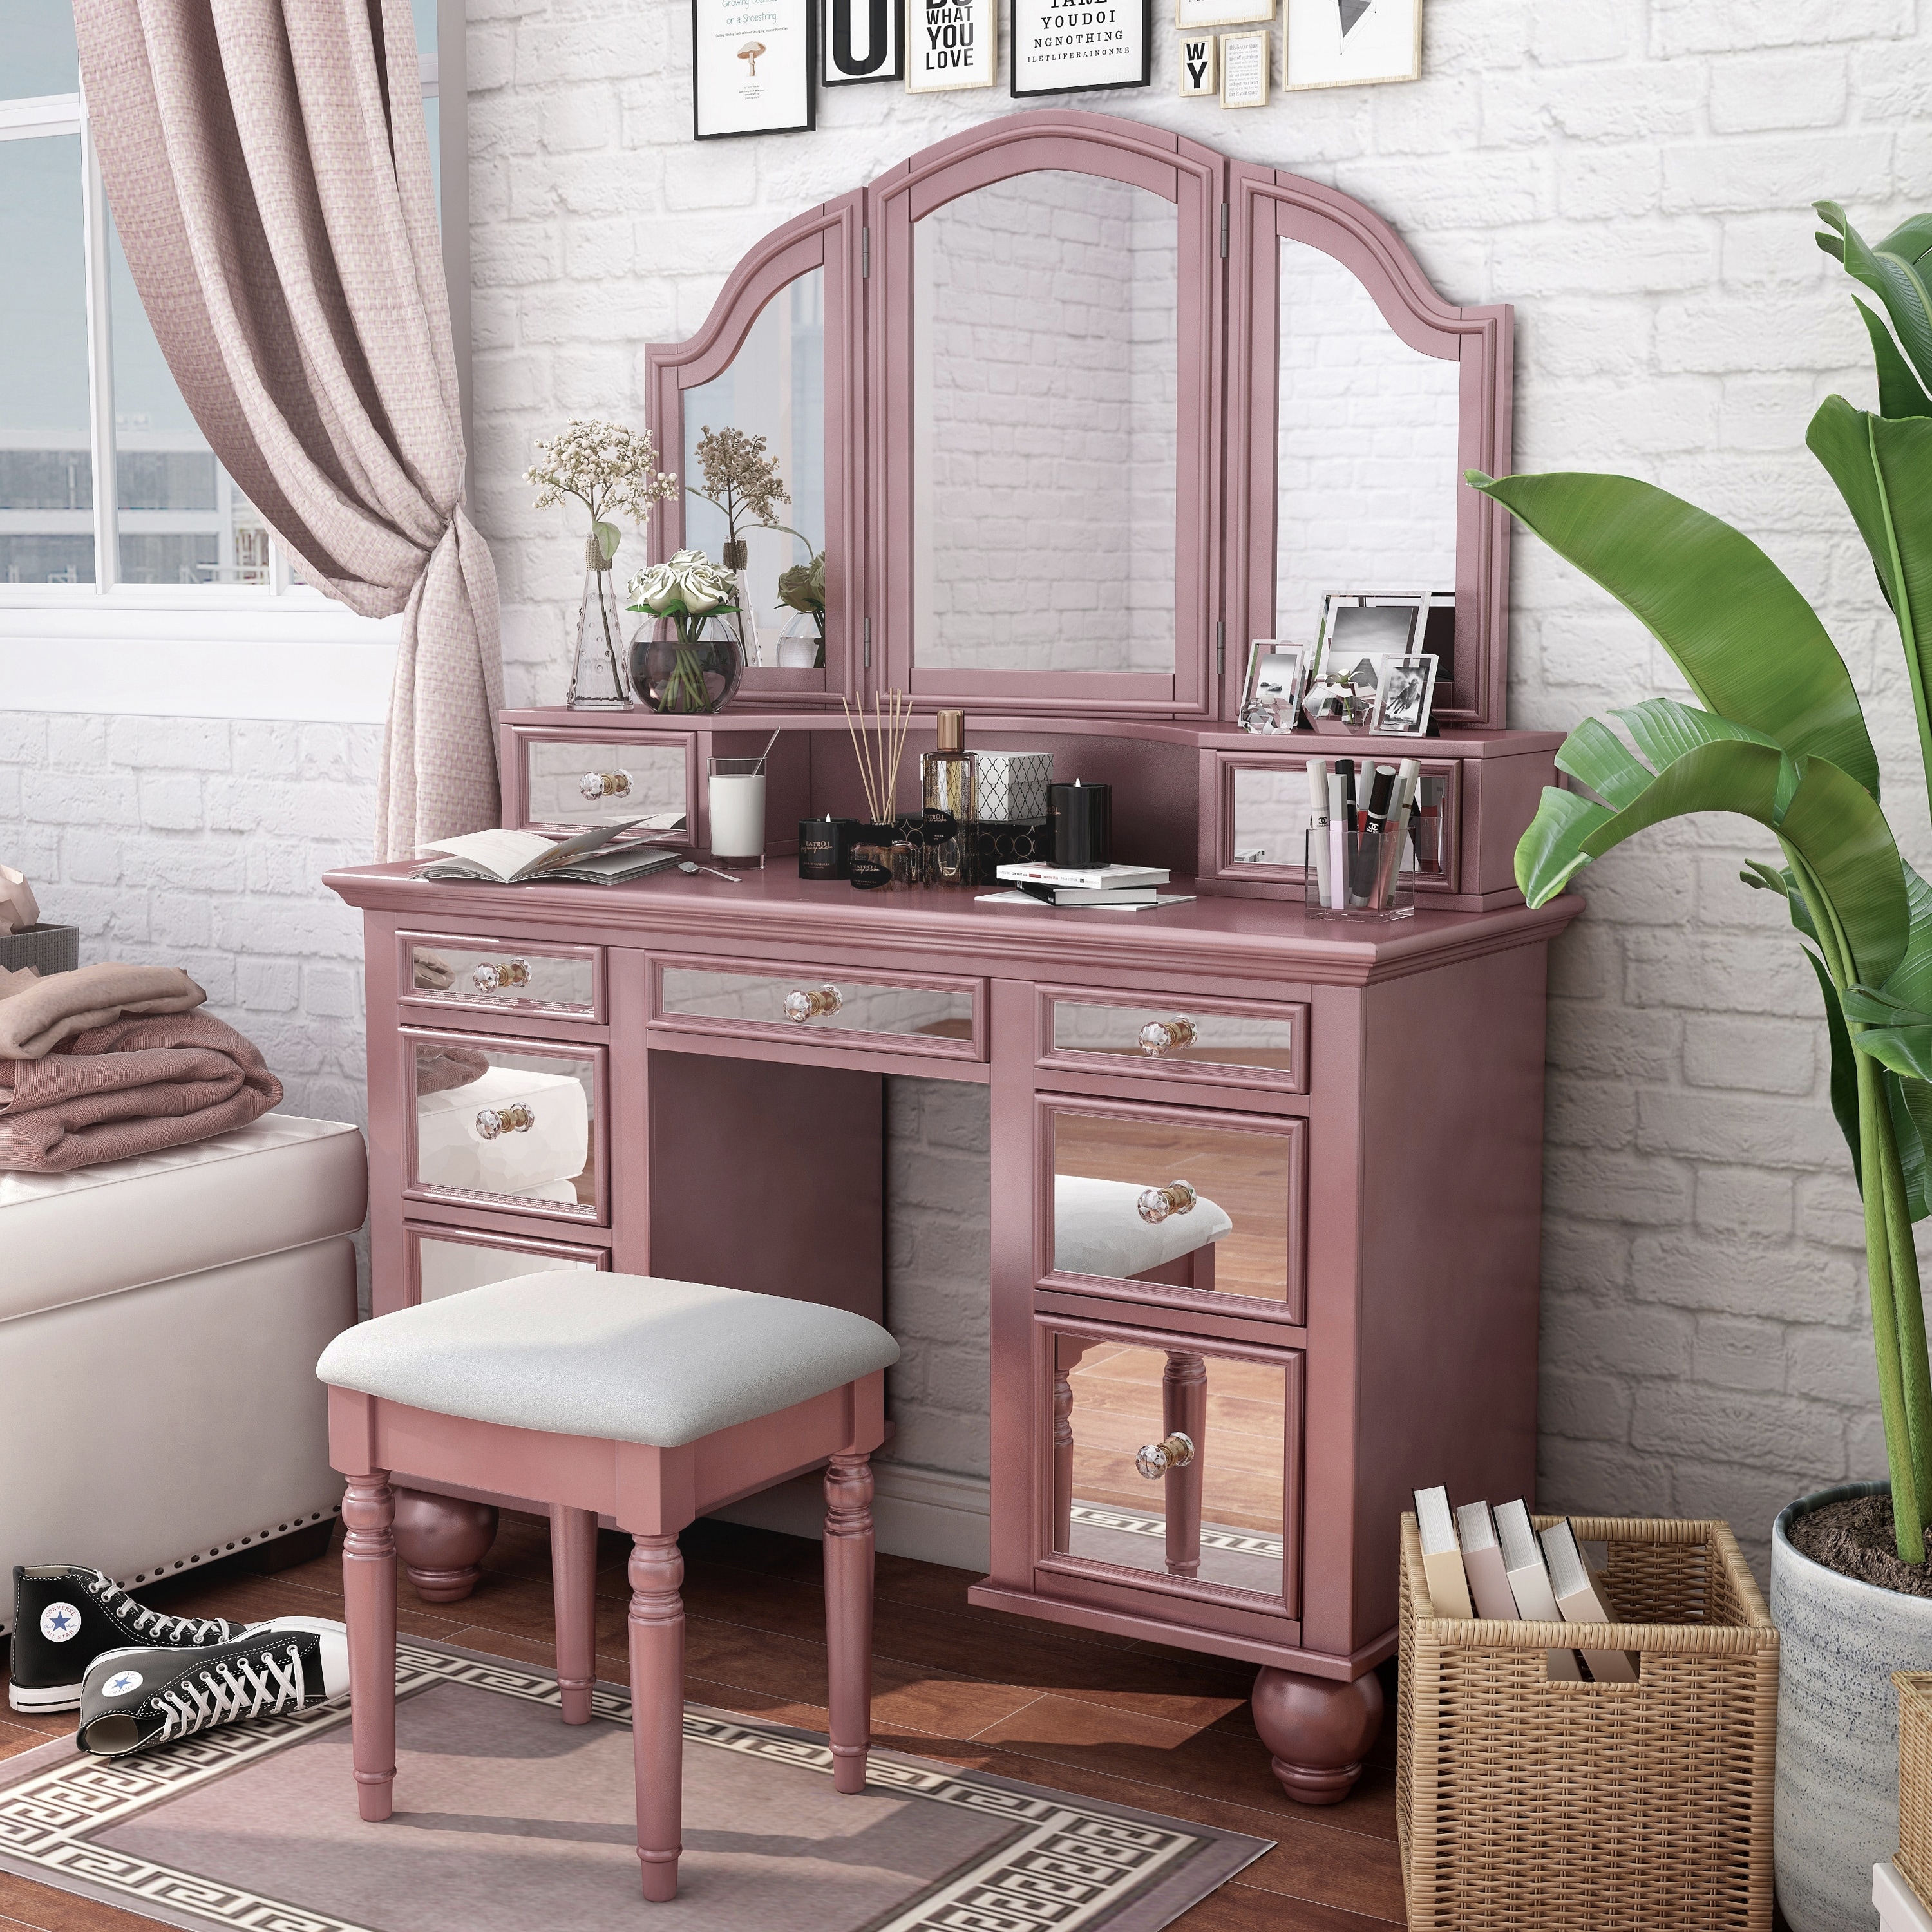 Nena Glam Wood 3-Piece Vanity Set with Tri-fold Mirror by Furniture of America | Overstock.com Shopping - The Best Deals on Bedroom Accents | 22704335